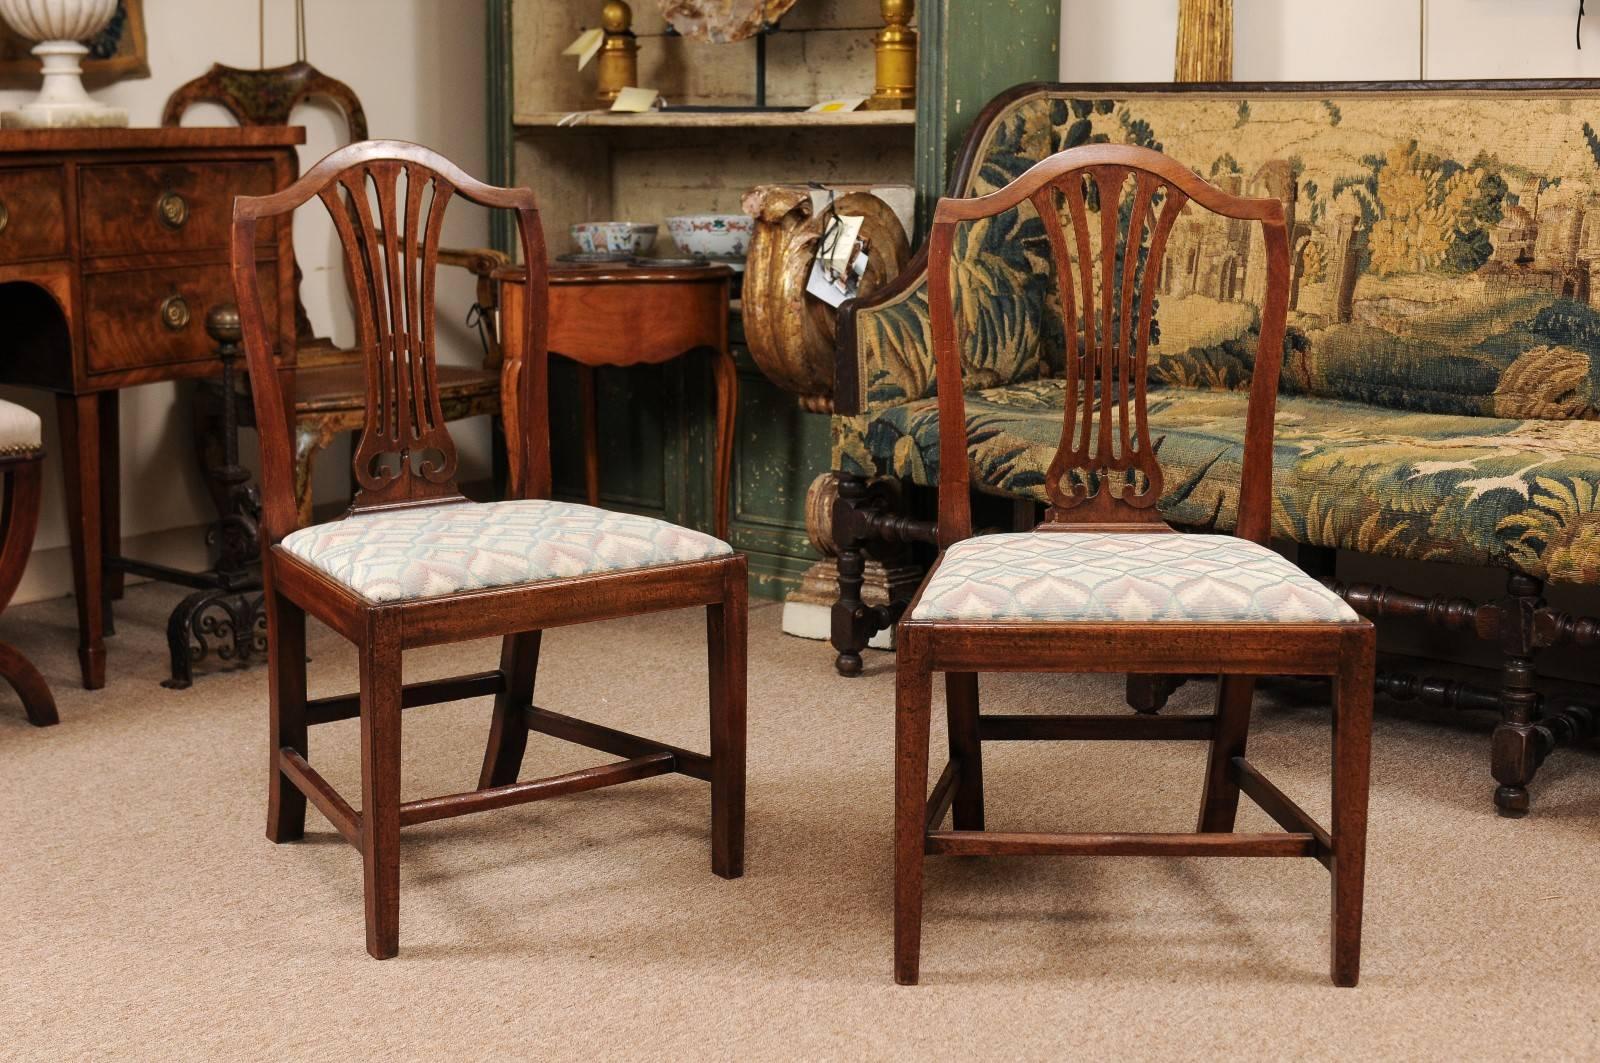 Set of eight George III dining chairs in mahogany with shield backs, slip seats and h-form stretchers.

William Word Fine Antiques: Atlanta's source for antique interiors since 1956.